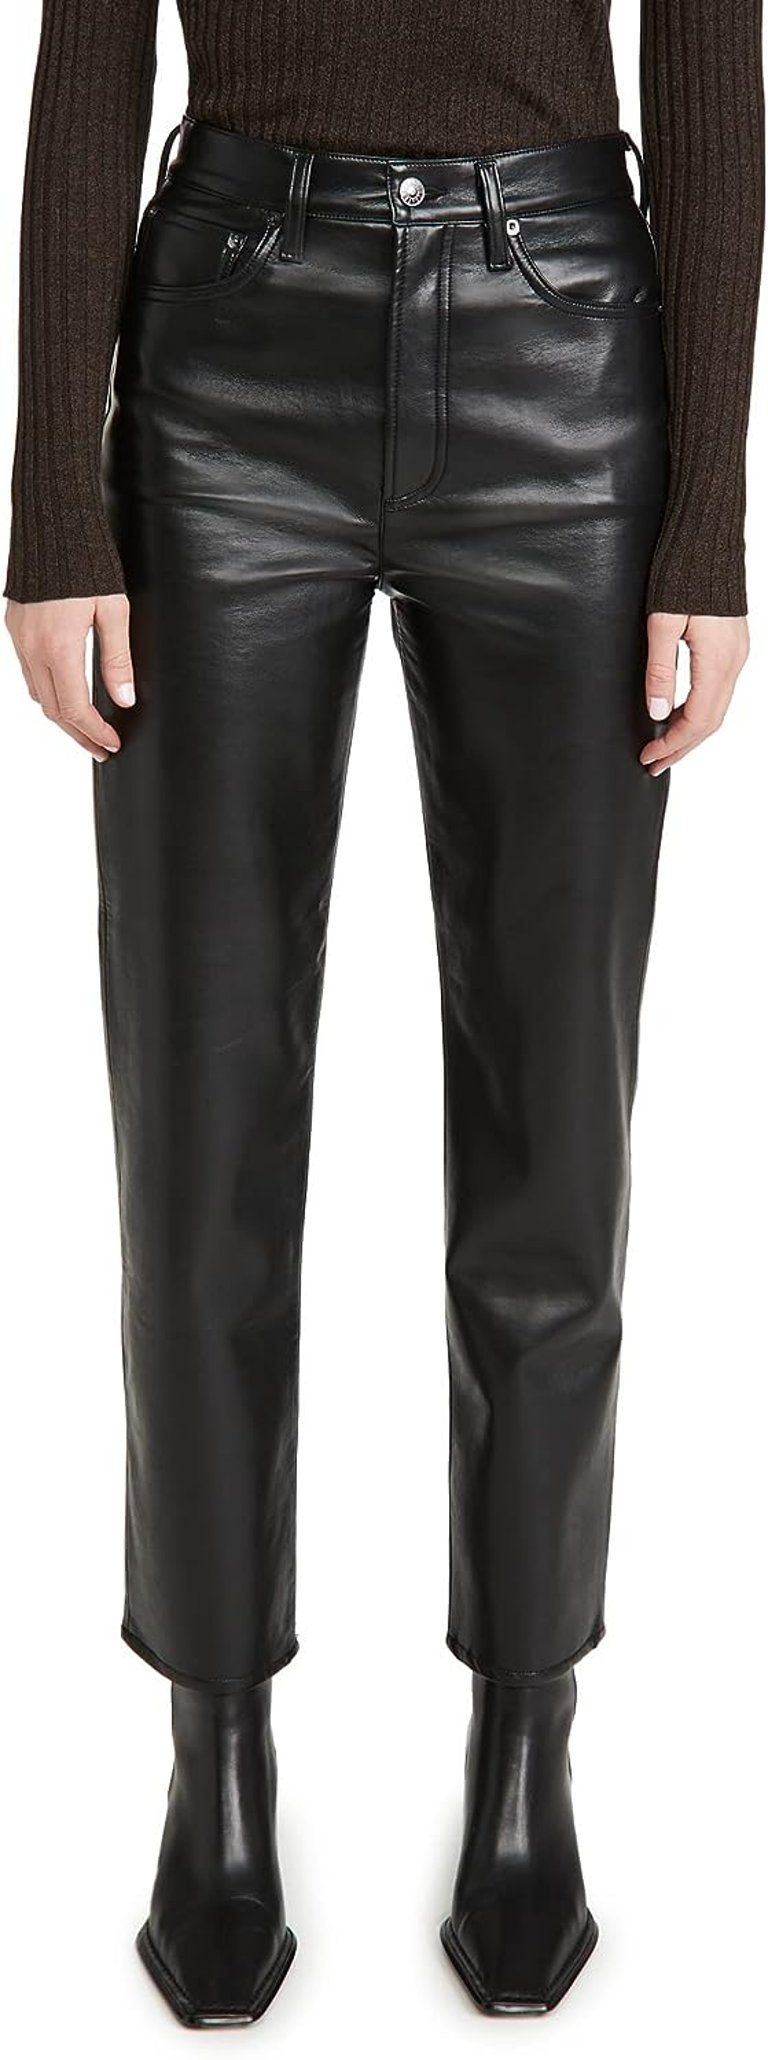 Women's Recycled Leather Fitted 90's Pants - Black